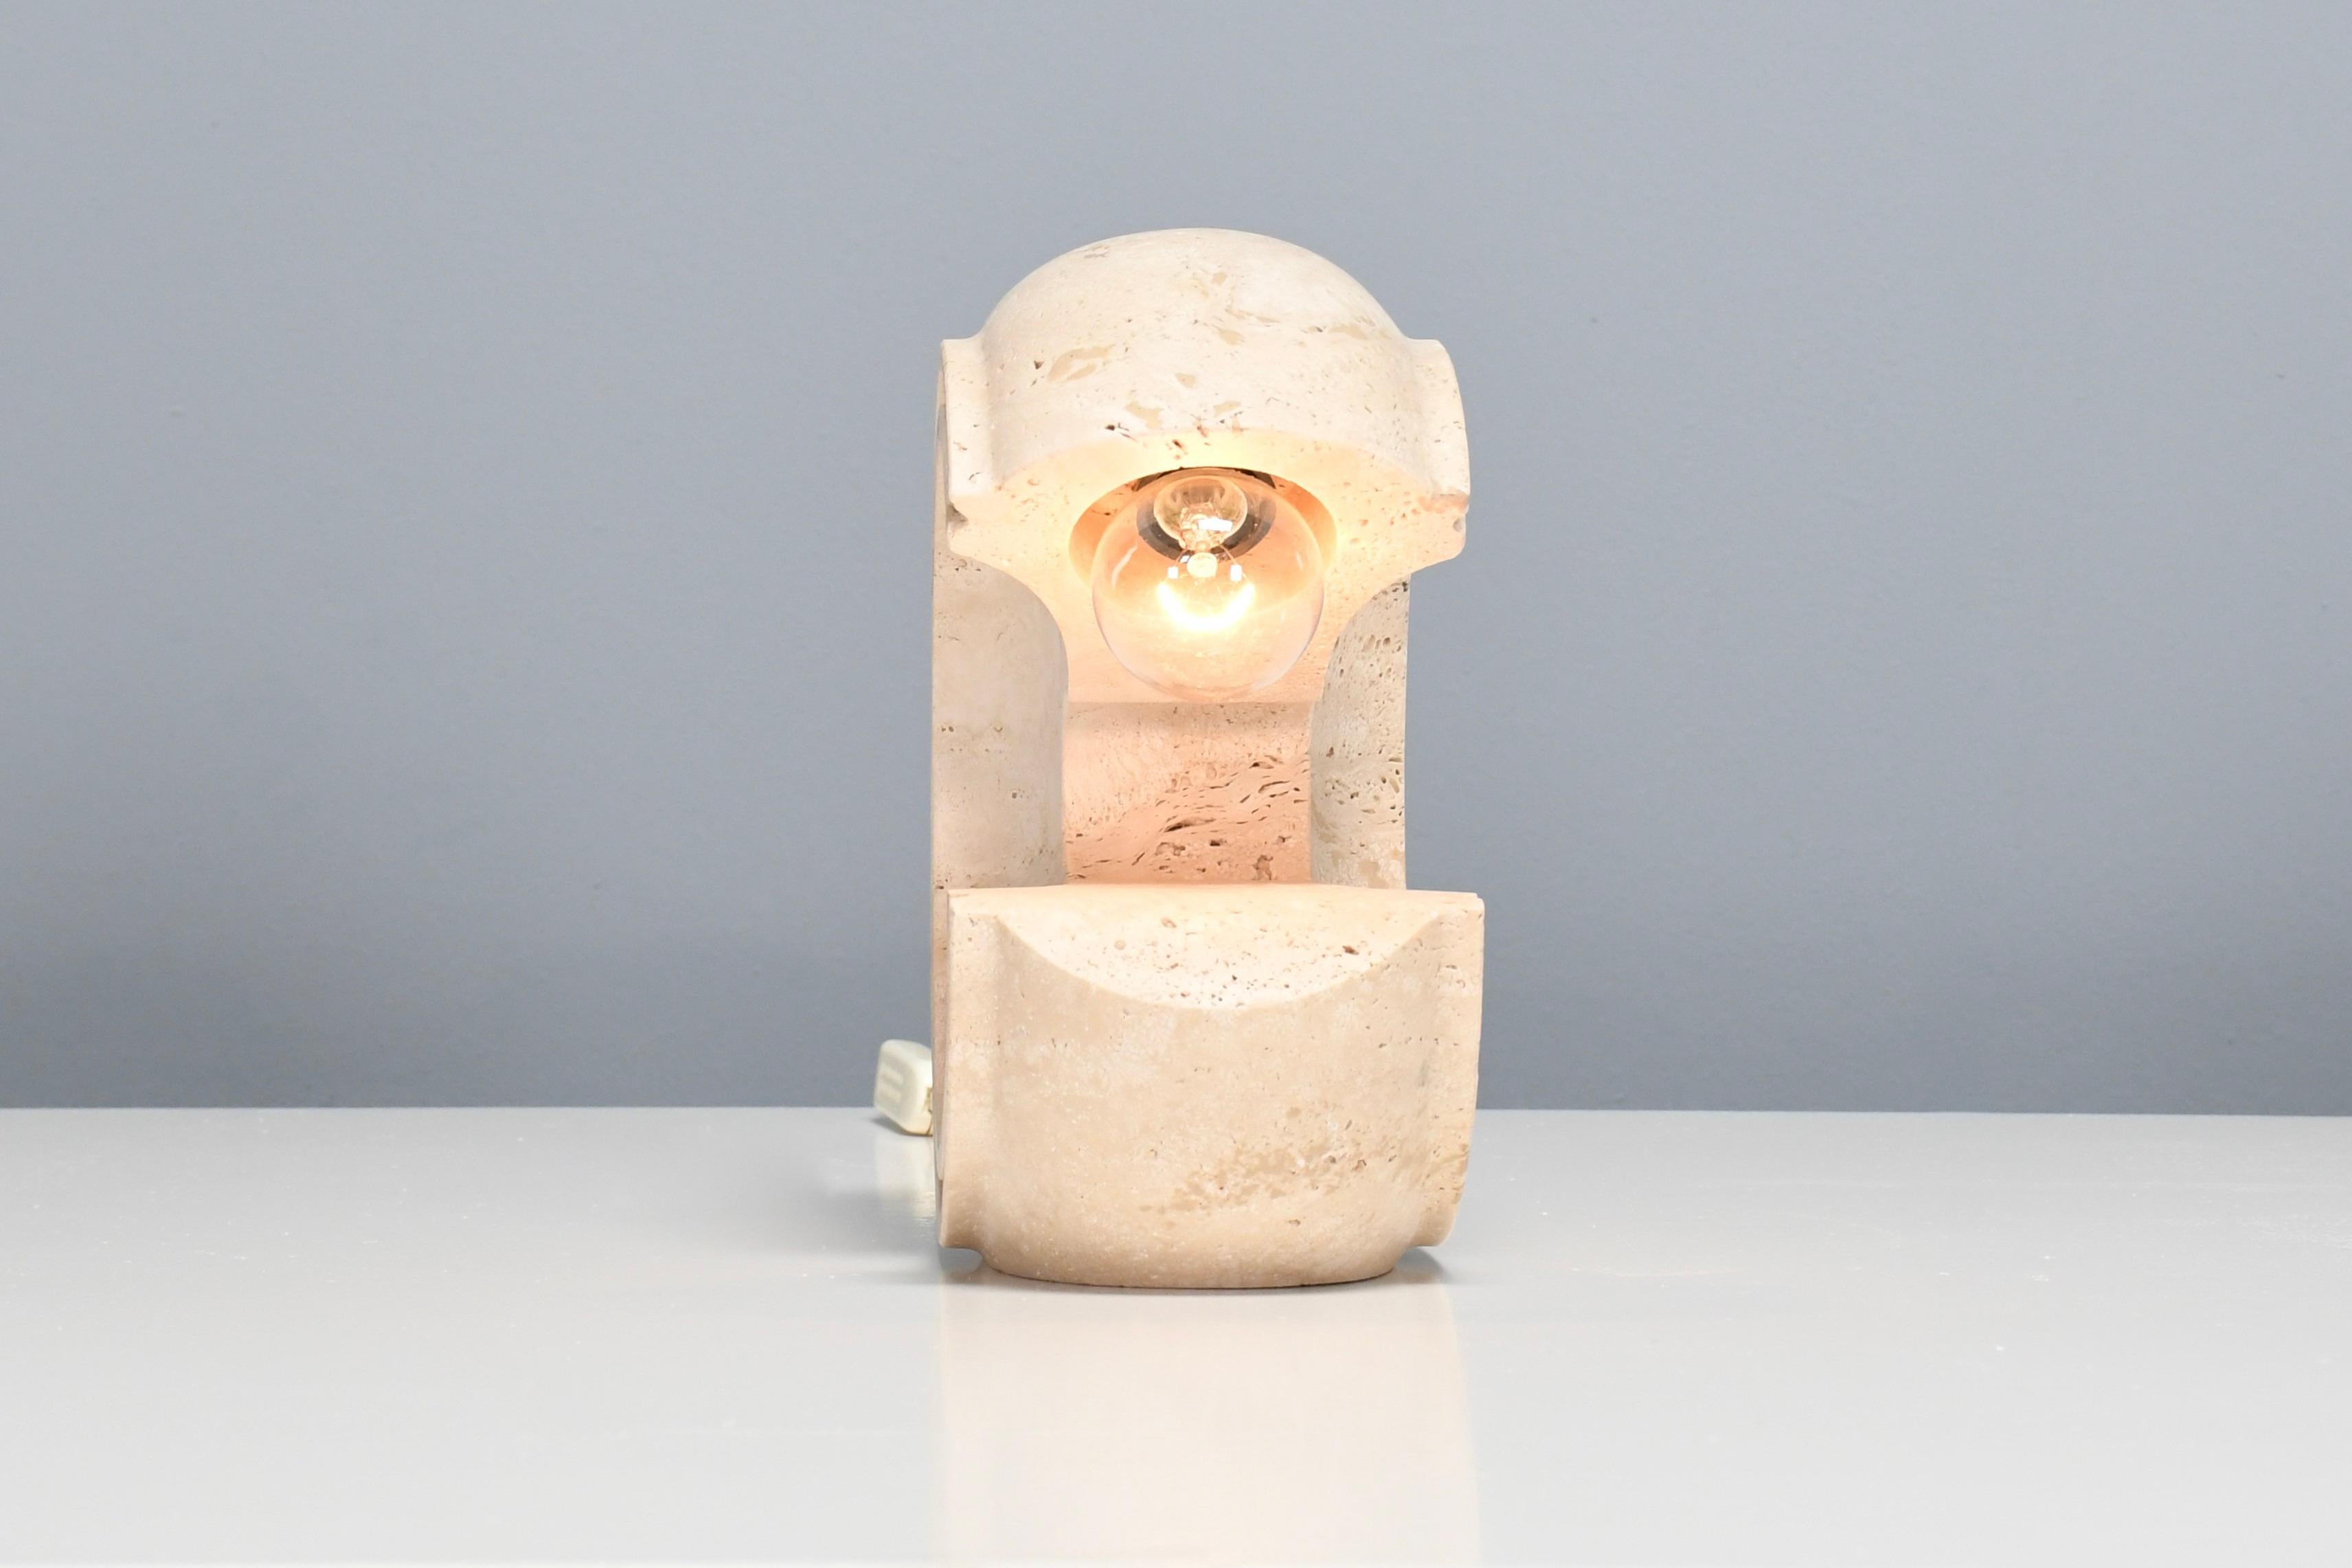 Sculptural Travertine Table Lamp by Giuliano Cesari for Nucleo Sormani, 1971 For Sale 2